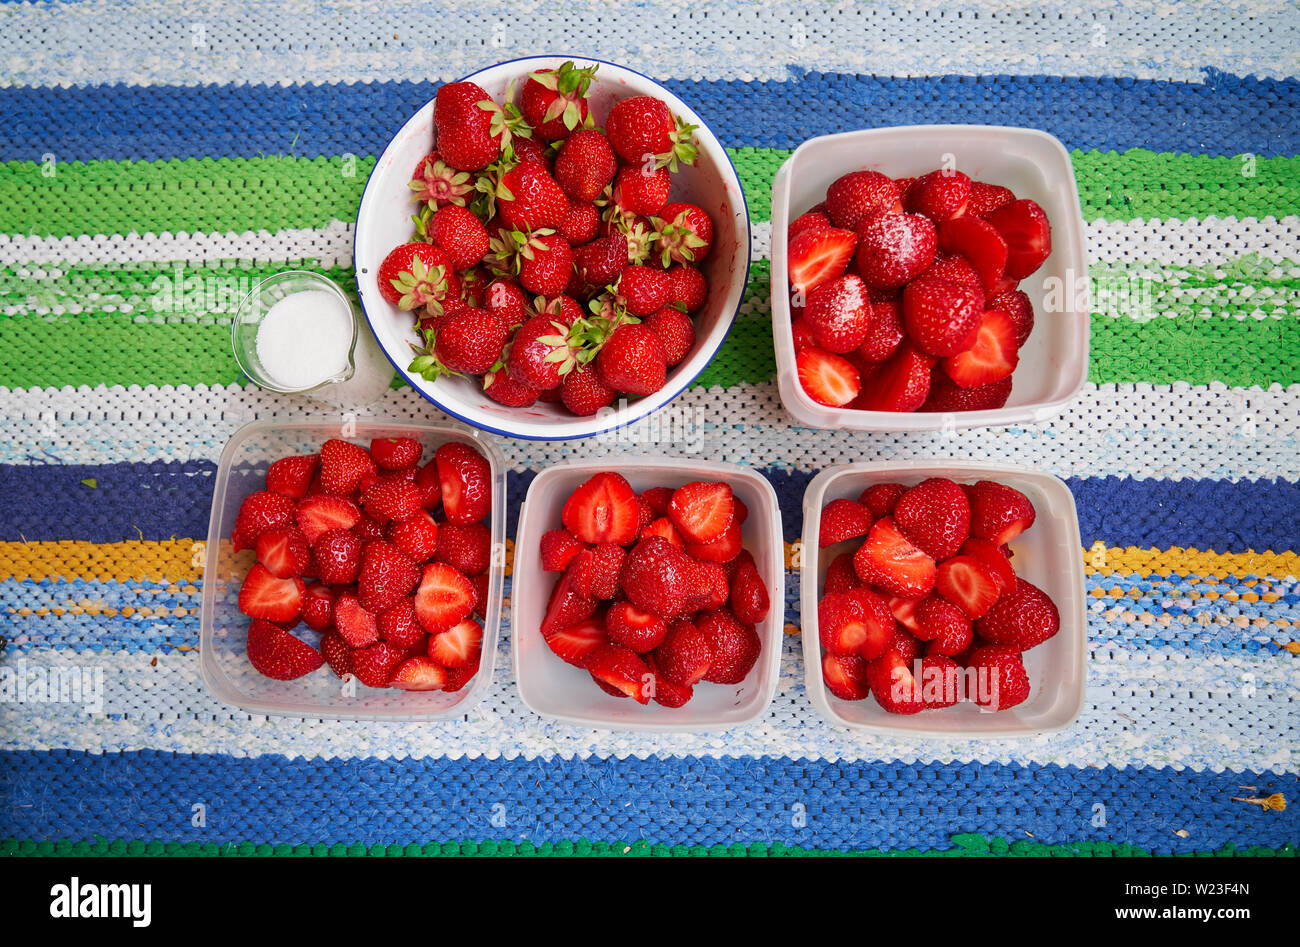 Fresh strawberries in plastic boxes ready for freezing and suger mug on colourful rag rug Stock Photo